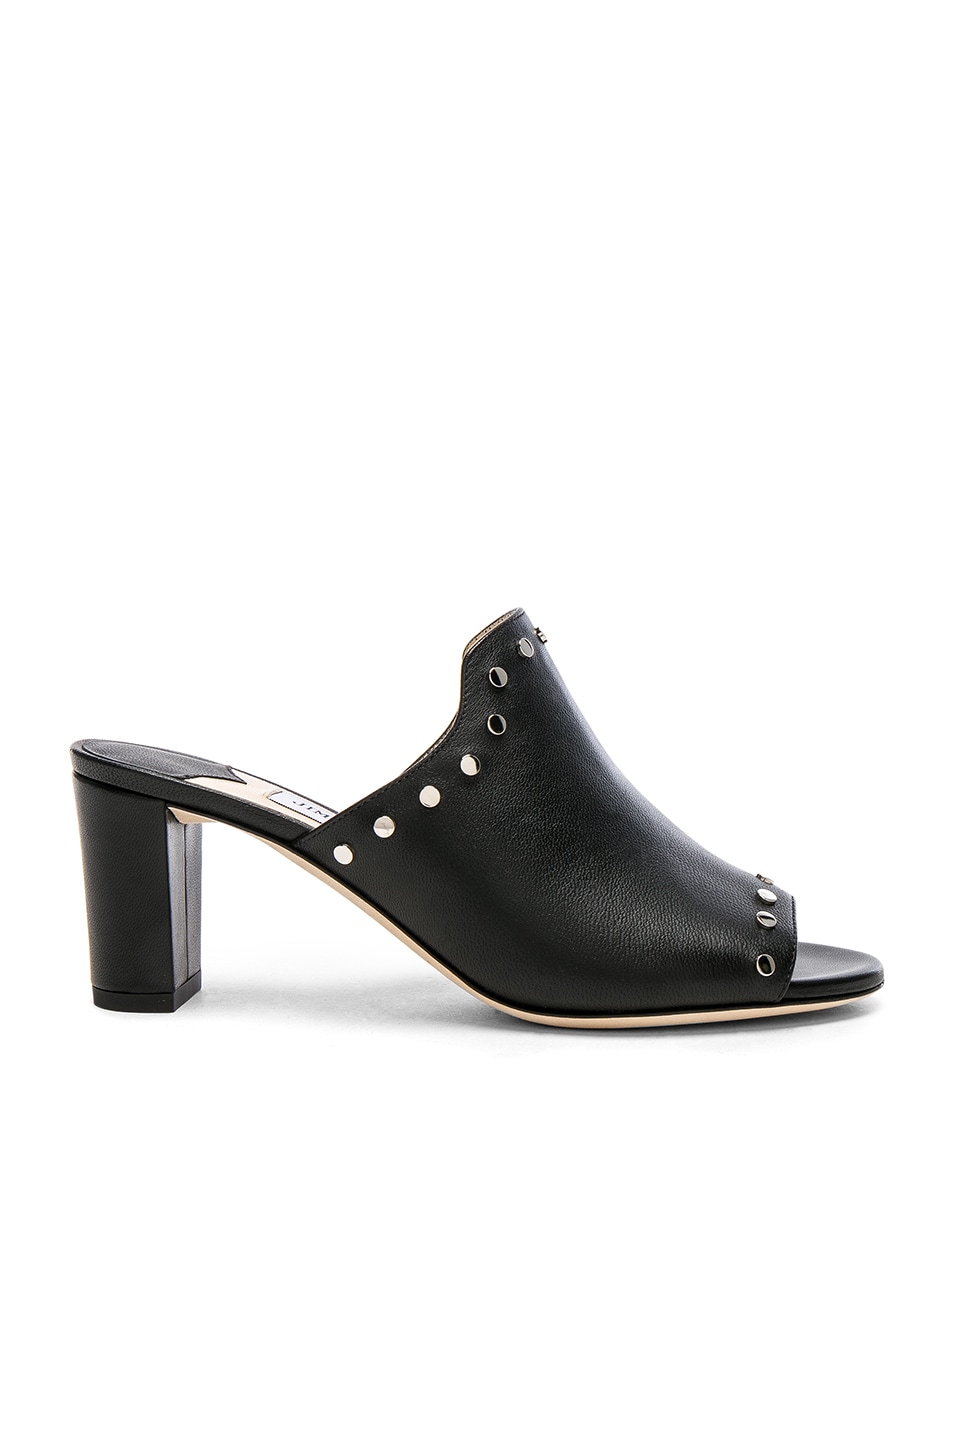 Image 1 of Jimmy Choo Leather Myla Mules with Studs in Black & Silver